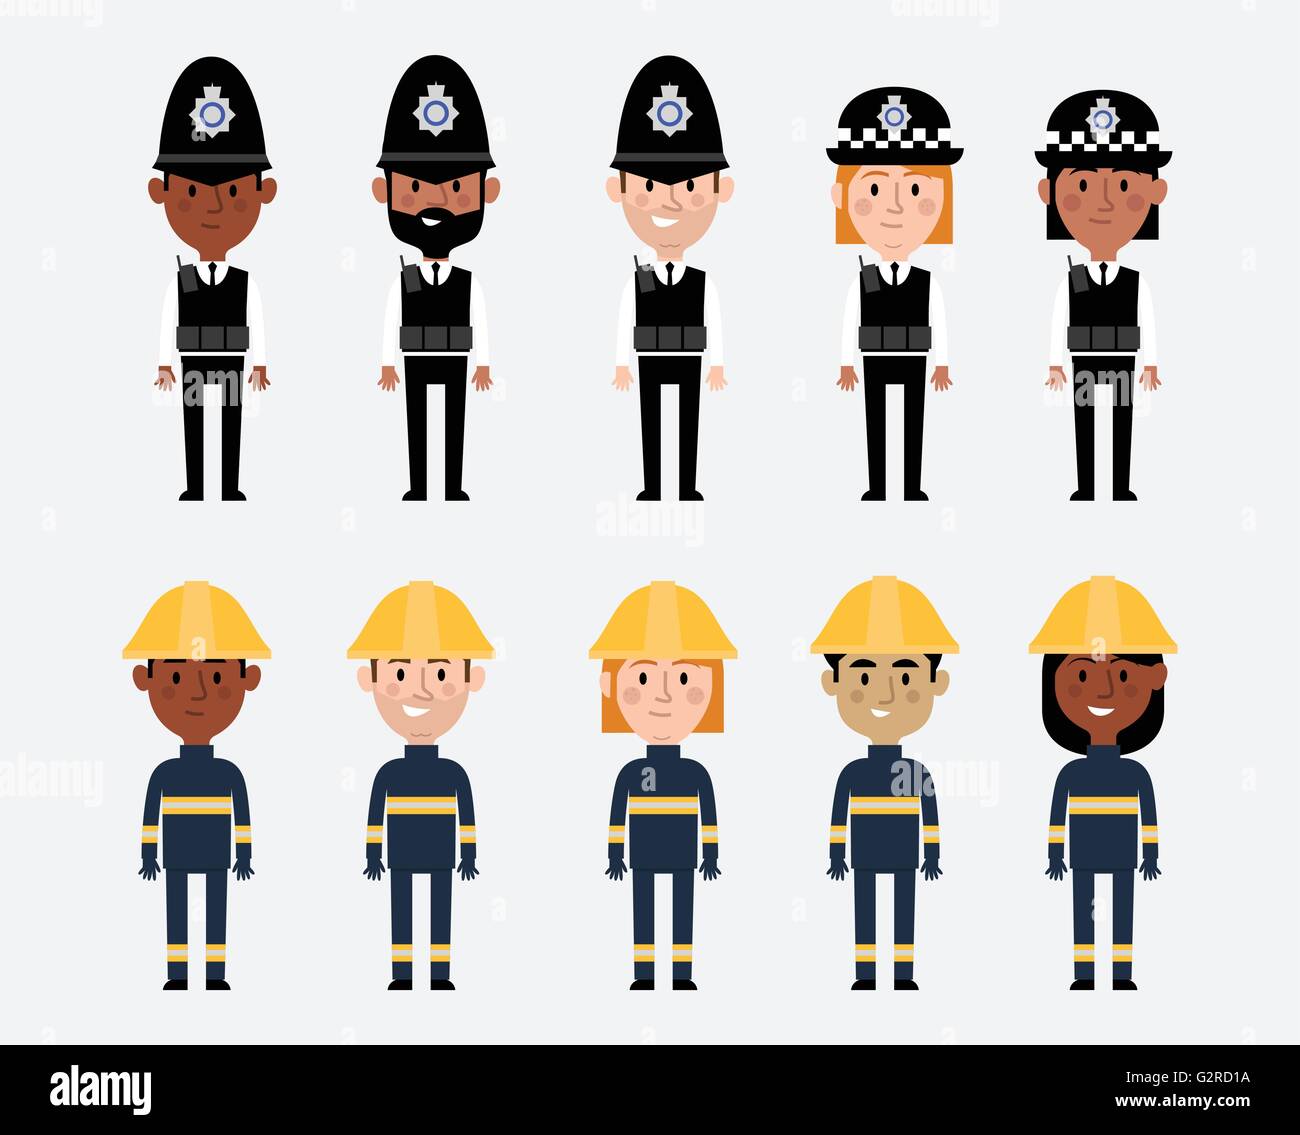 Illustrations Of Occupations In UK Police And Fire Services Stock Vector